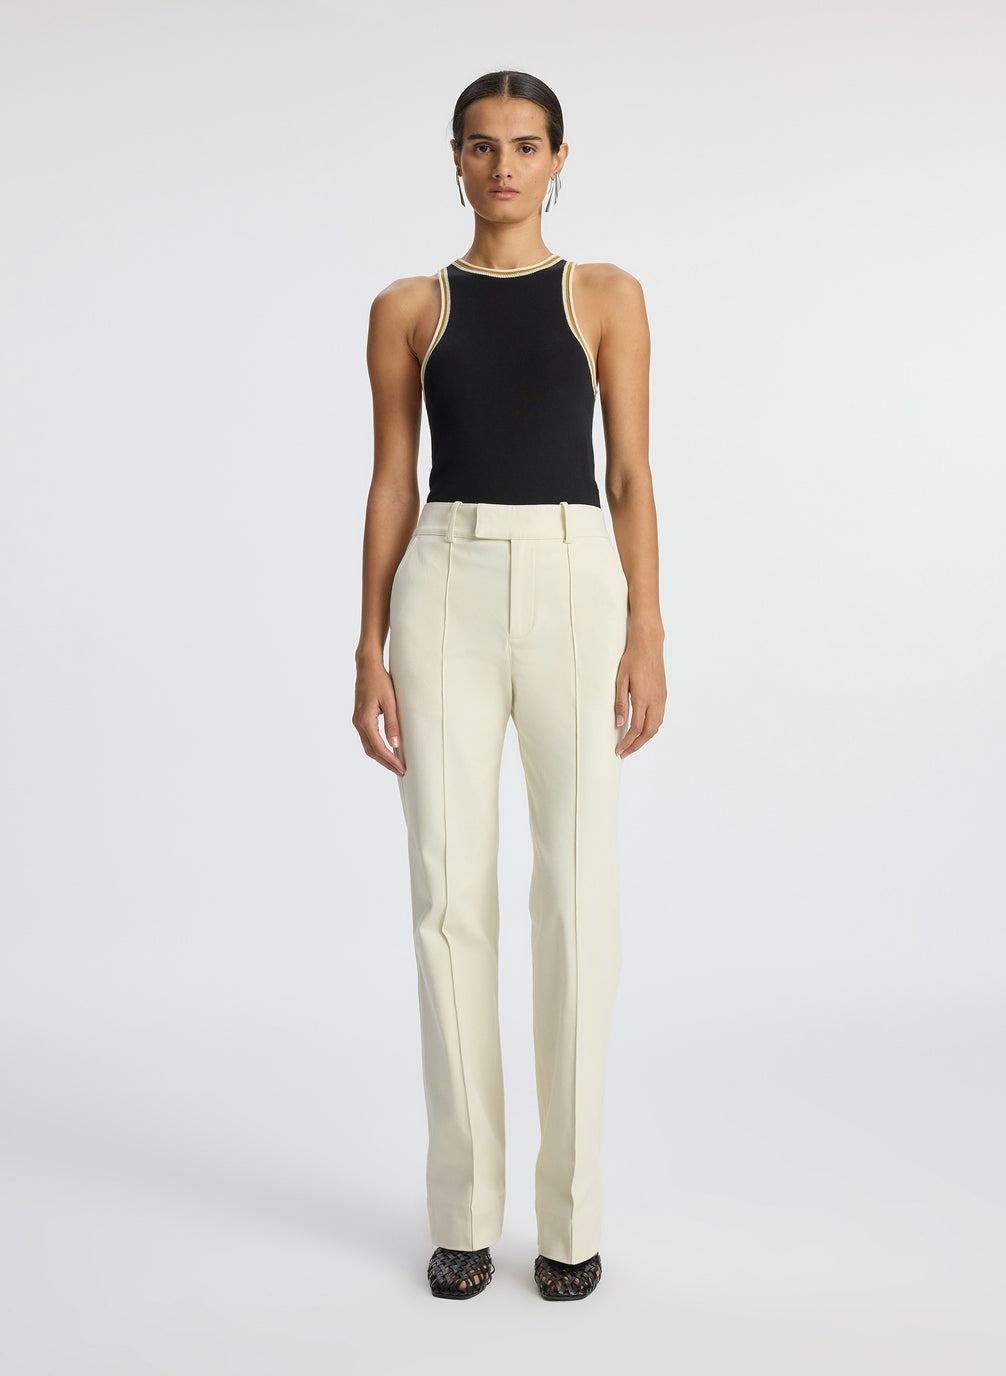 front view of woman wearing black tank top with contrast trim and cream pants